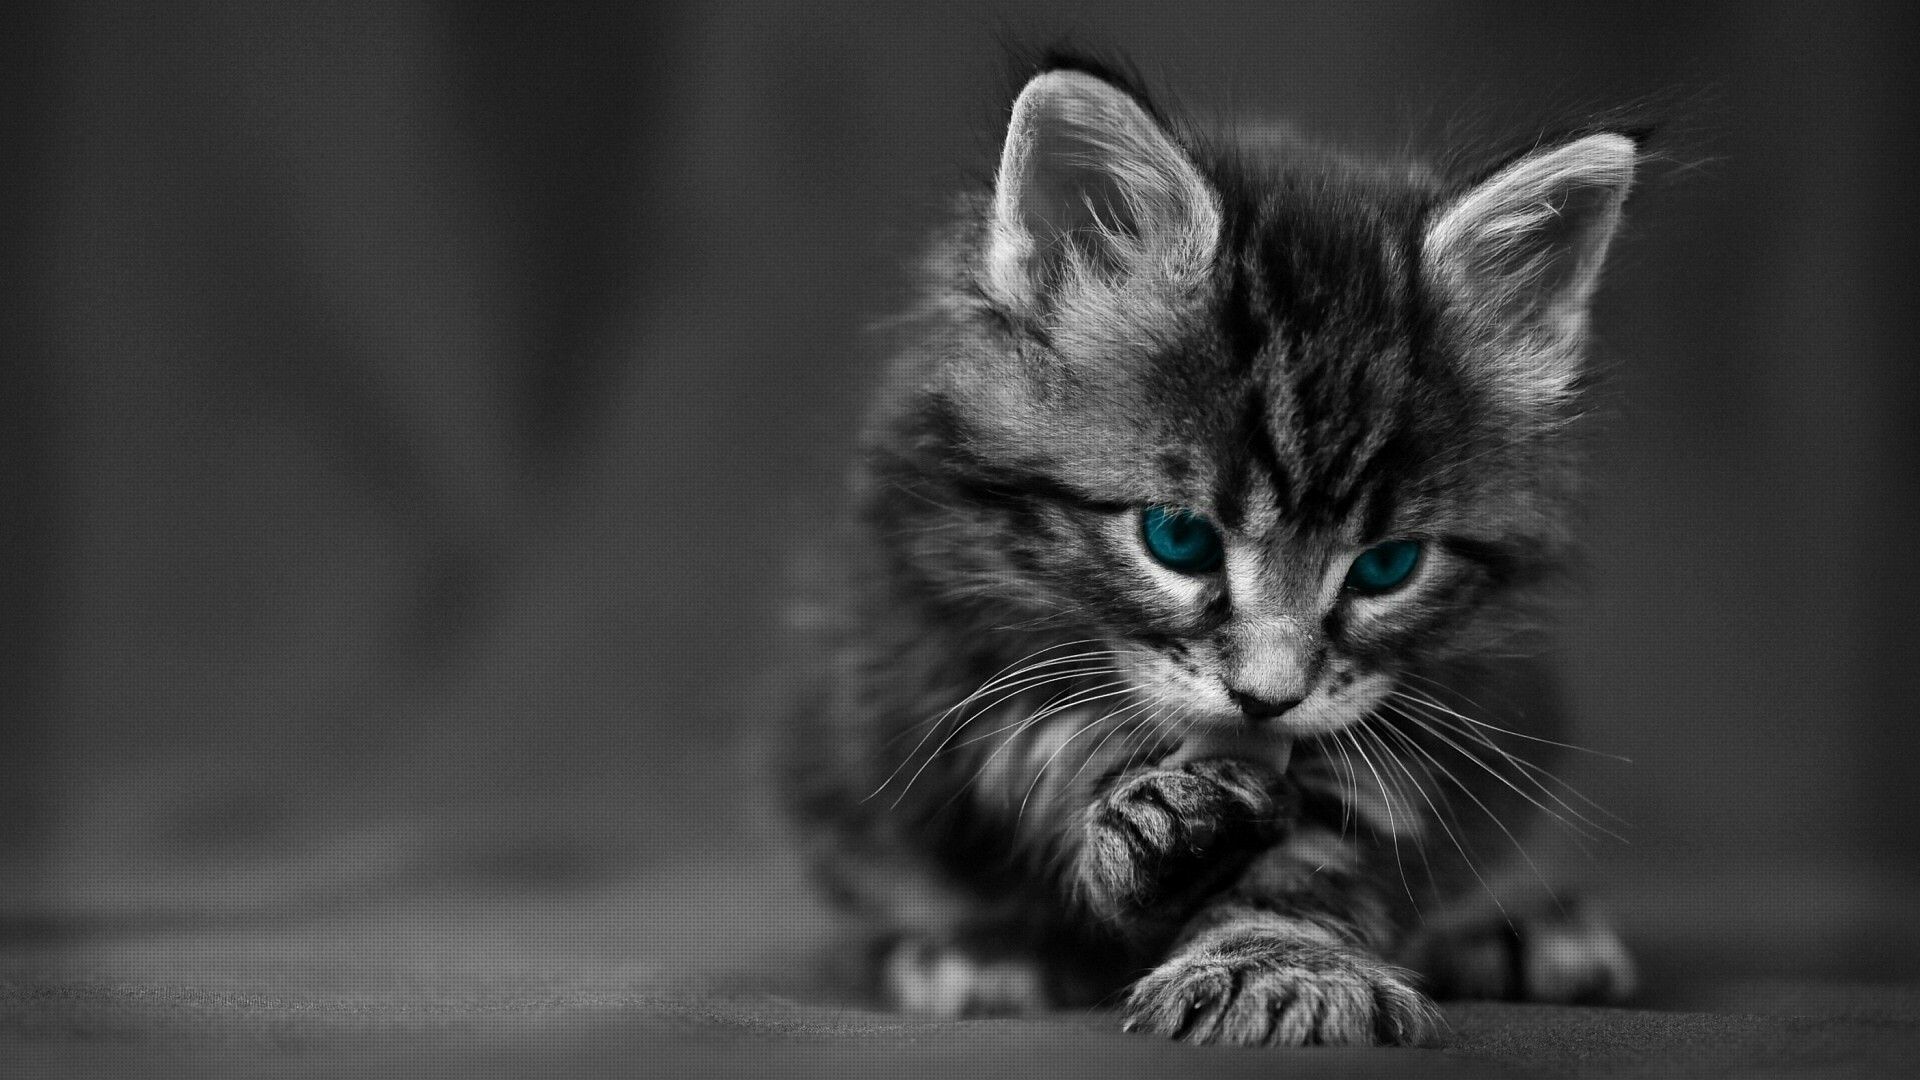 Kitten: Cat with blue eyes, A carnivorous mammal. 1920x1080 Full HD Background.